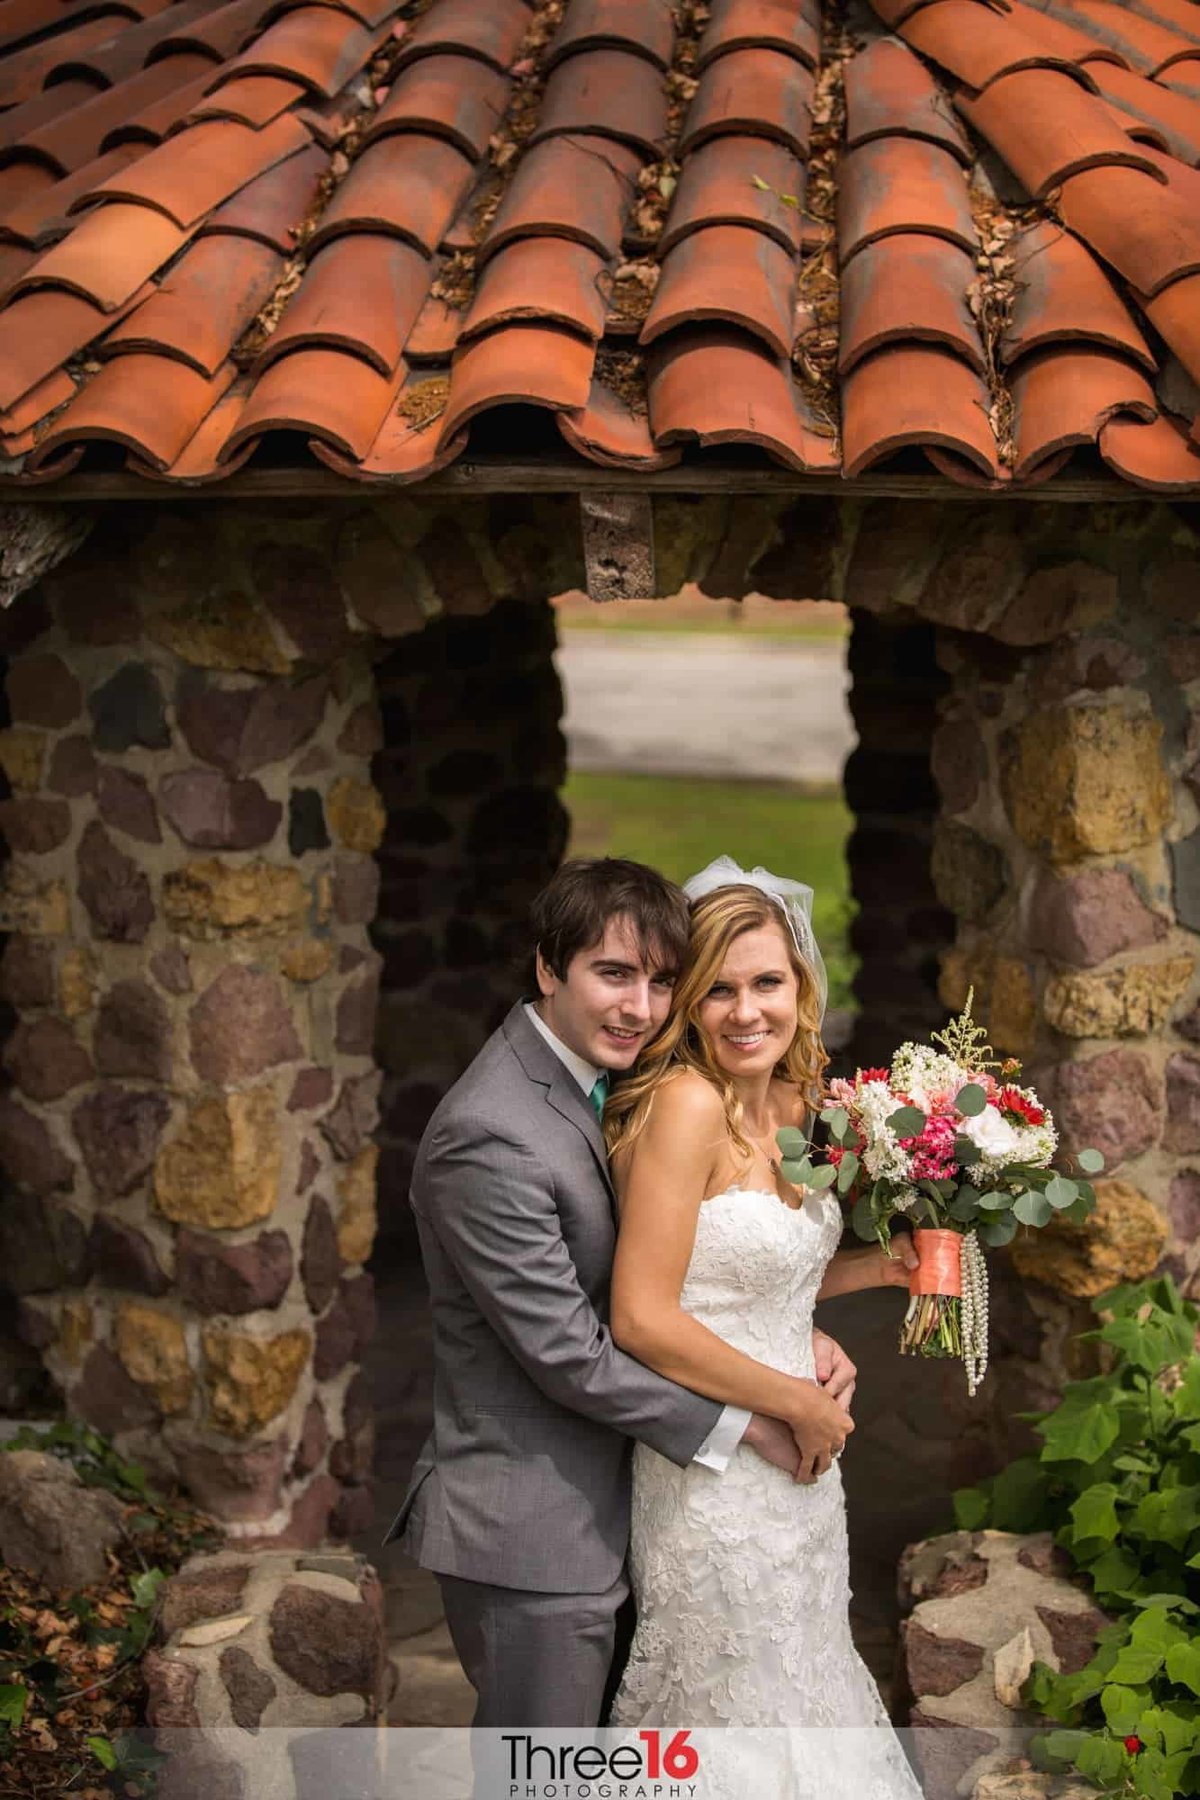 Groom embraces his Bride for photos in front of cobblestone gazebo